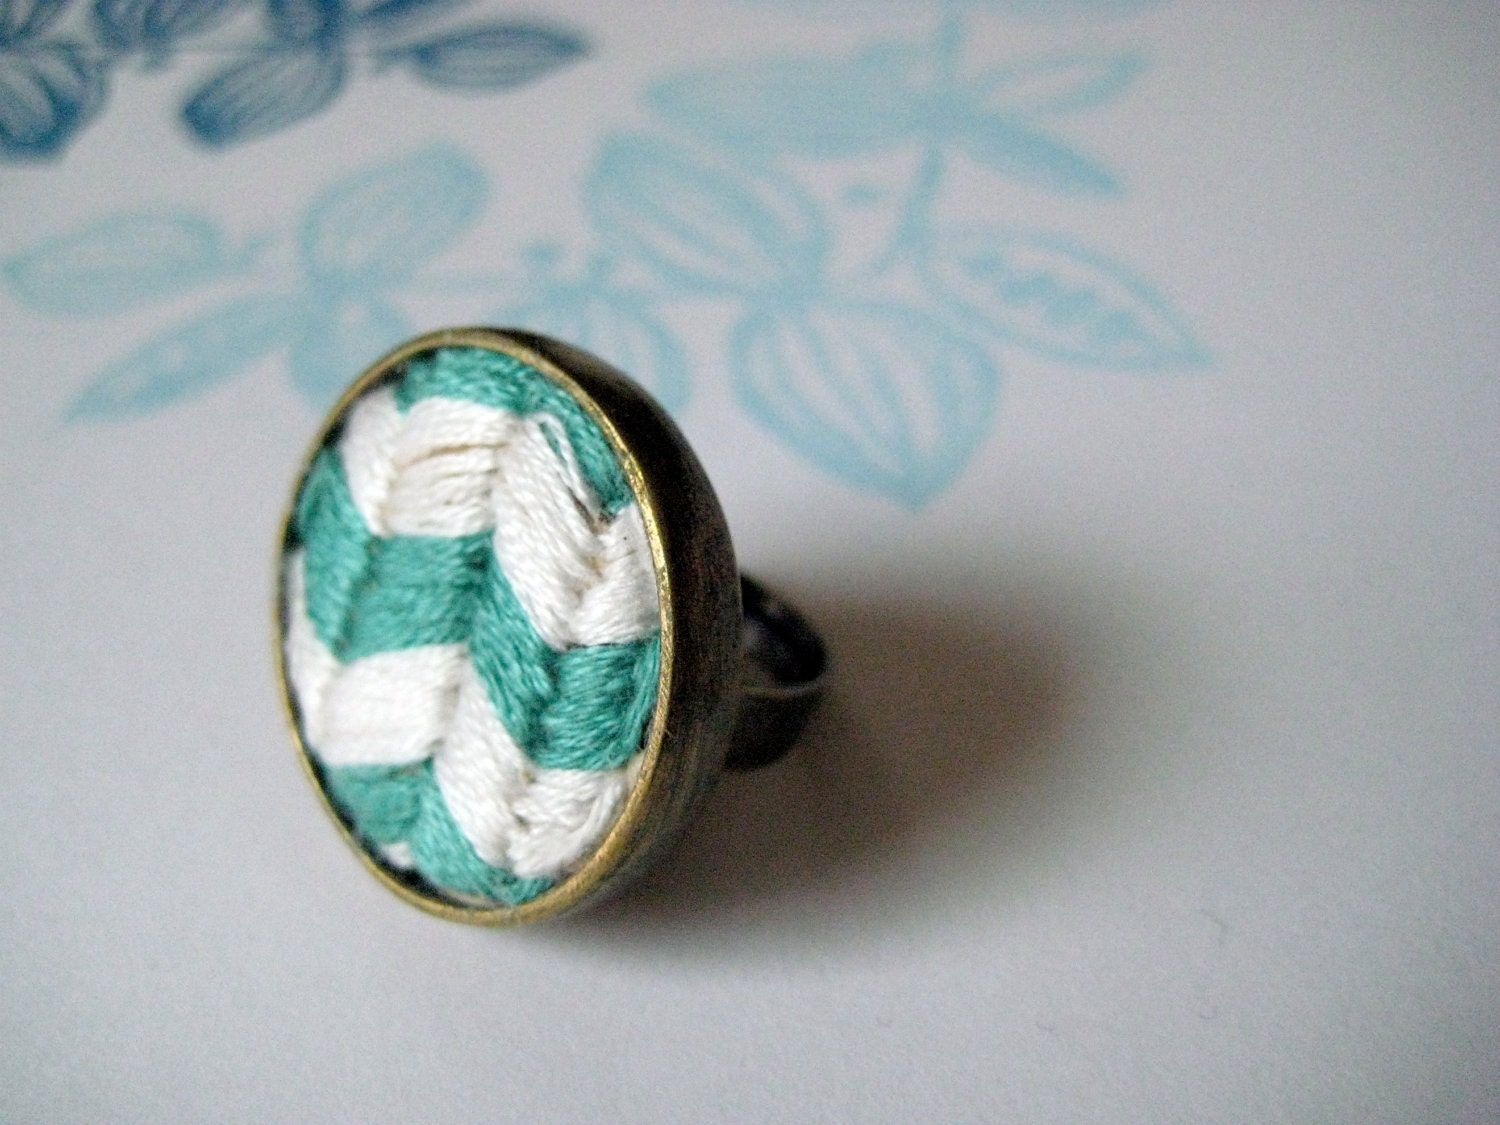 Chevron Love in turquoise, embroidered ring